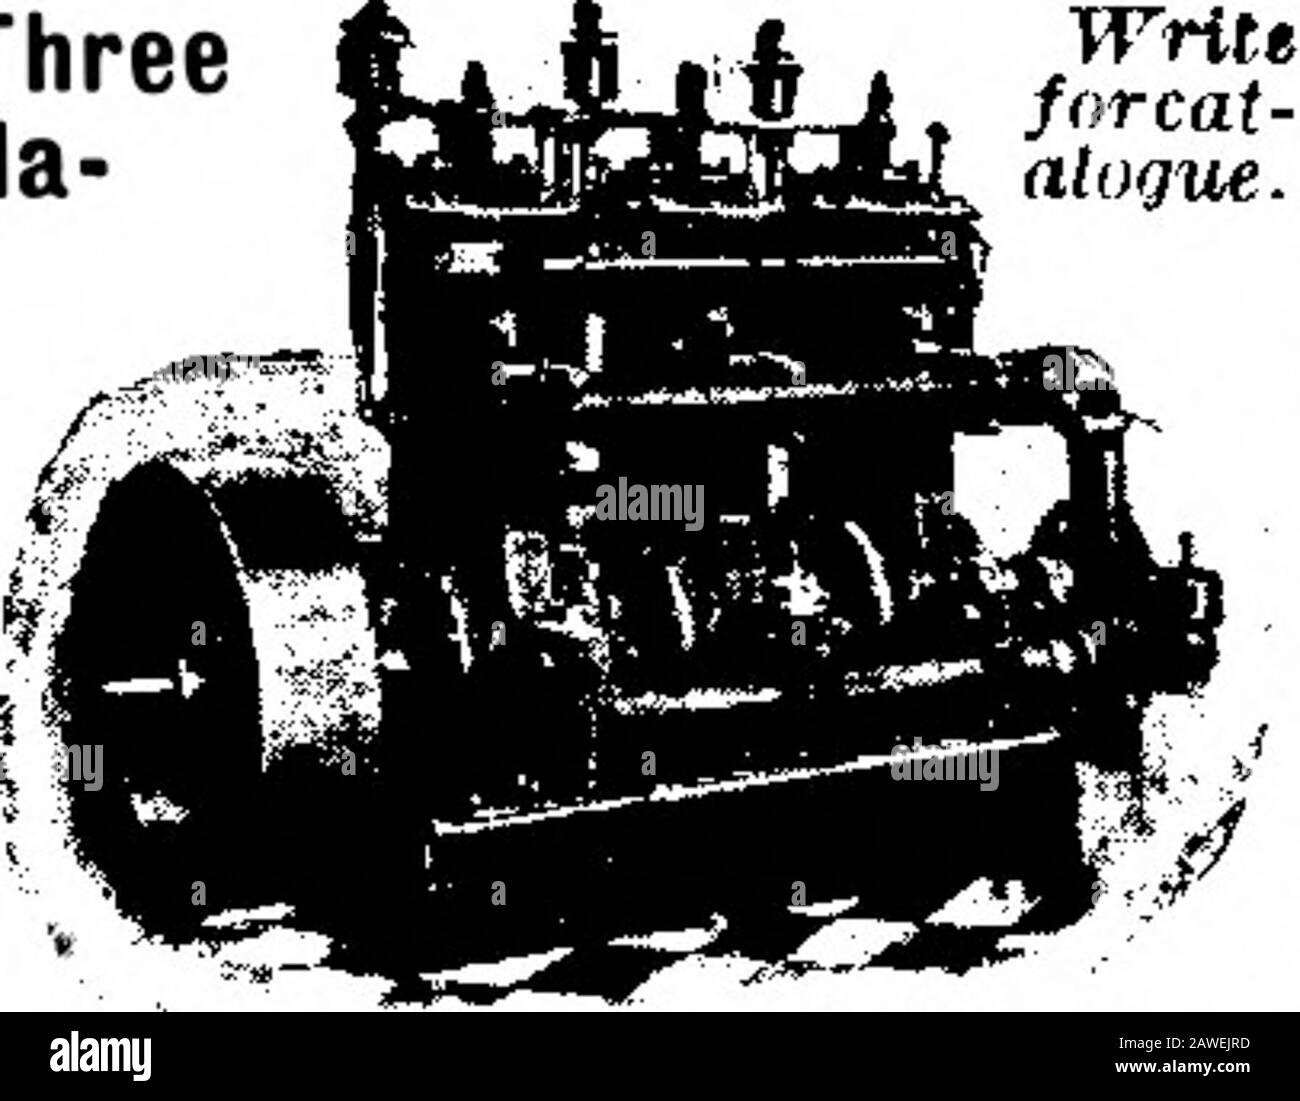 https://c8.alamy.com/comp/2AWEJRD/scientific-american-volume-88-number-10-march-1903-cutting-off-machines-both-hand-and-power-sizes-1-to-0-incheswater-gas-and-steam-fit-ters-tools-hinged-pipe-visespipe-cutters-stocks-and-d-iesuniversally-acknowledged-to-bethe-best-vwsendf-or-catalogthe-armstrong-mfg-cobridgeport-conn-the-wolverine-threecylinder-gasoline-ma-rine-engine-the-only-reversing-andself-to-the-power-built-practi-cally-no-vibration-absolute-ly-safe-single-double-andtriple-marine-and-stationarvmotors-from-to-30-h-p-wolverine-motor-worksgrand-rapids-mich-2AWEJRD.jpg